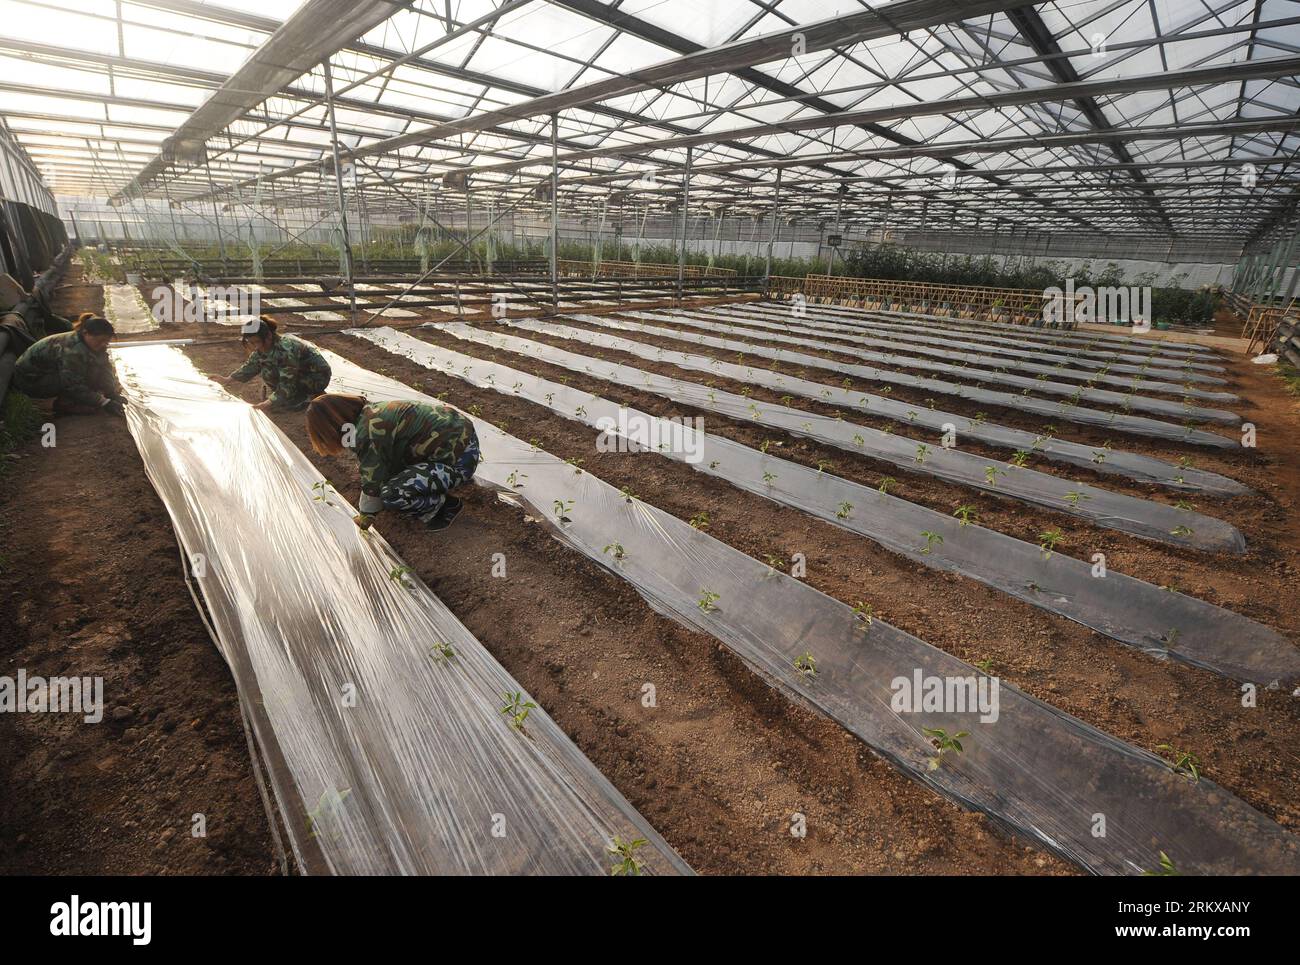 Bildnummer: 58929363  Datum: 11.12.2012  Copyright: imago/Xinhua TAIYUAN, Dec. 11, 2012 - Villagers plant vegetables in a greenhouse in Jingadao Village of Changzhi County, north China s Shanxi Province, Dec. 11, 2012. Jingadao Village of Changzhi County has formed a recycling economy. Villagers here use marsh gas as fuel after fermenting pig excrement, adopt clean sewage disposal system, produce natural fertilizer with animal excrement and plant green vegetables. (Xinhua/Yan Yan) (lfj) SHANXI-CHANGZHI-ENVIRONMENTAL FRIENDLY VILLAGE (CN) PUBLICATIONxNOTxINxCHN Wirtschaft Landwirtschaft Gewächs Stock Photo